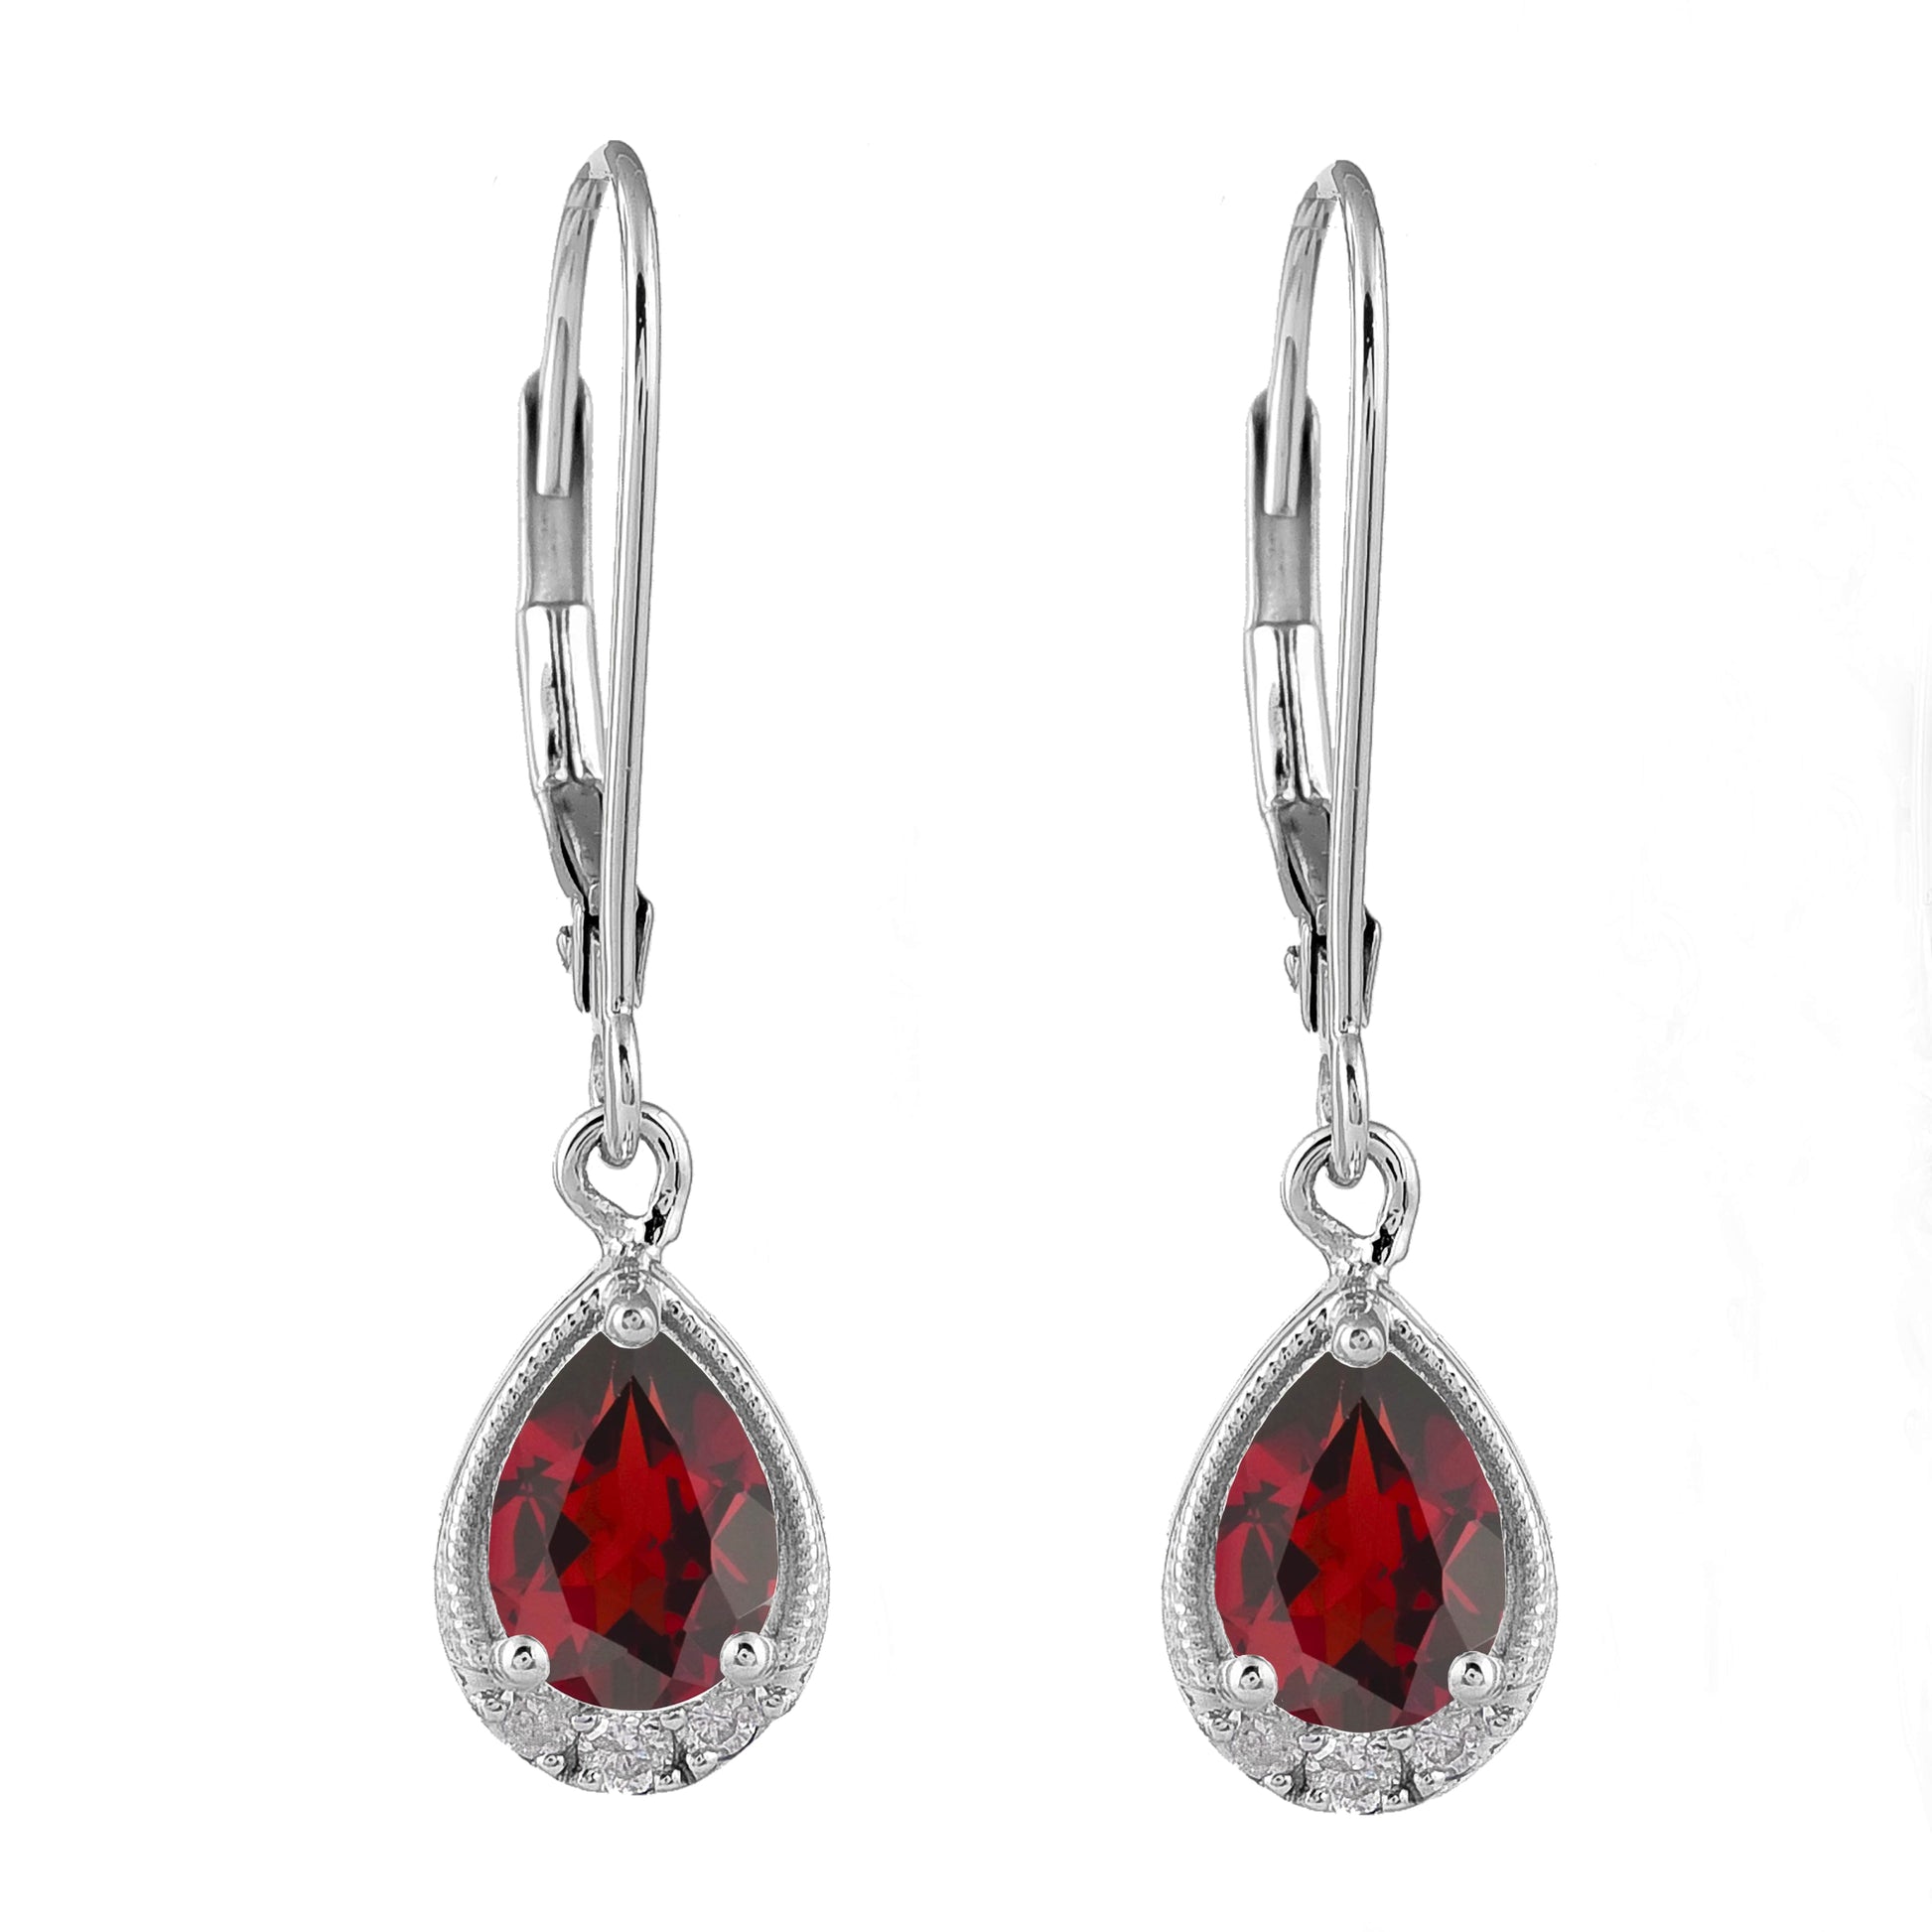 Sparkling Teardrop Dangles for a Touch of Elegance